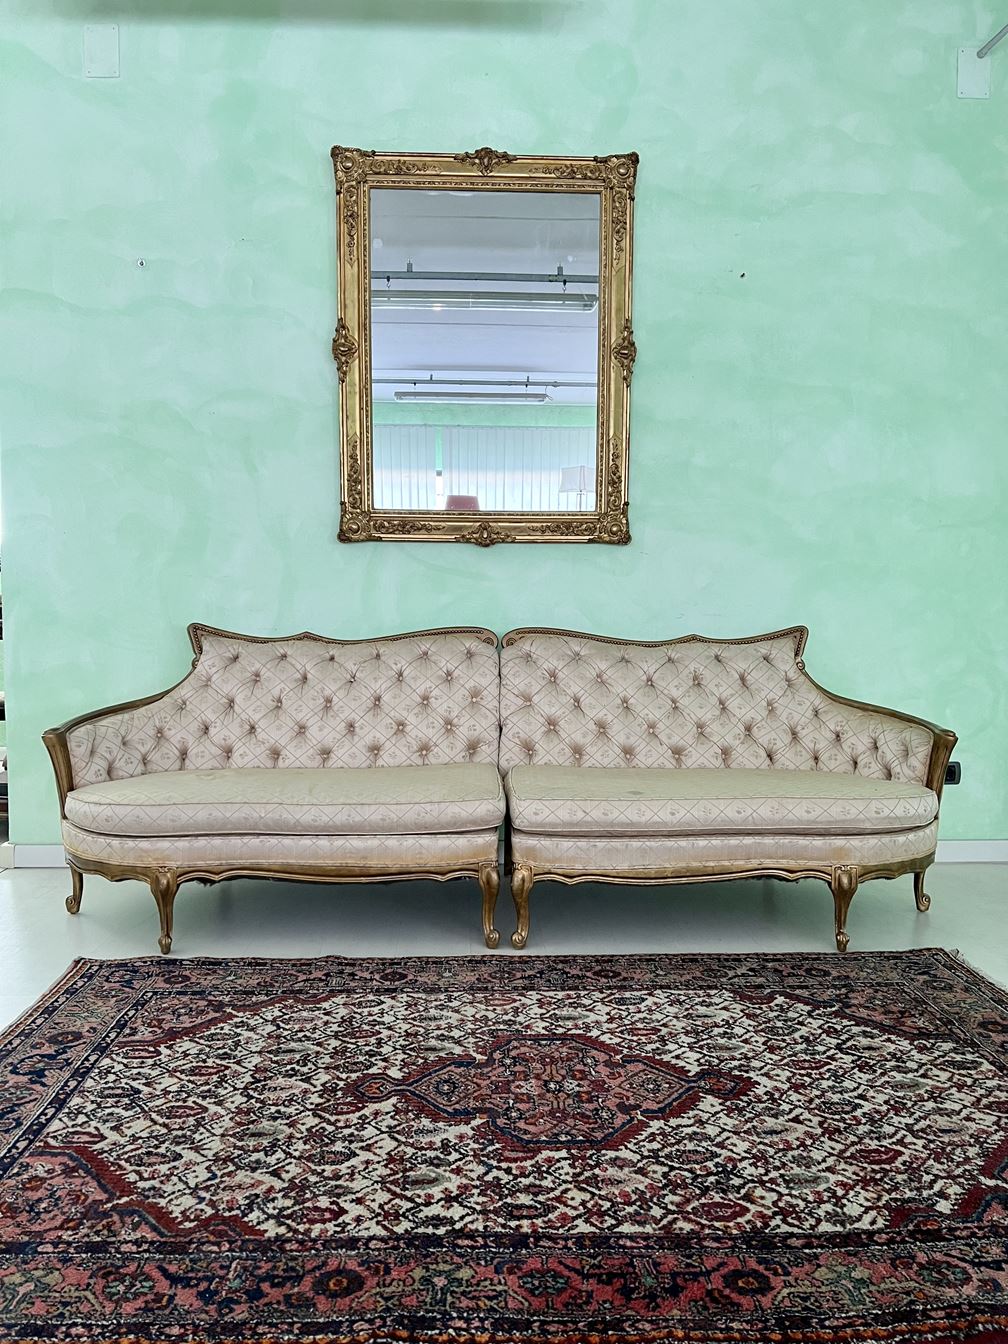 French sofa from the early 1900s